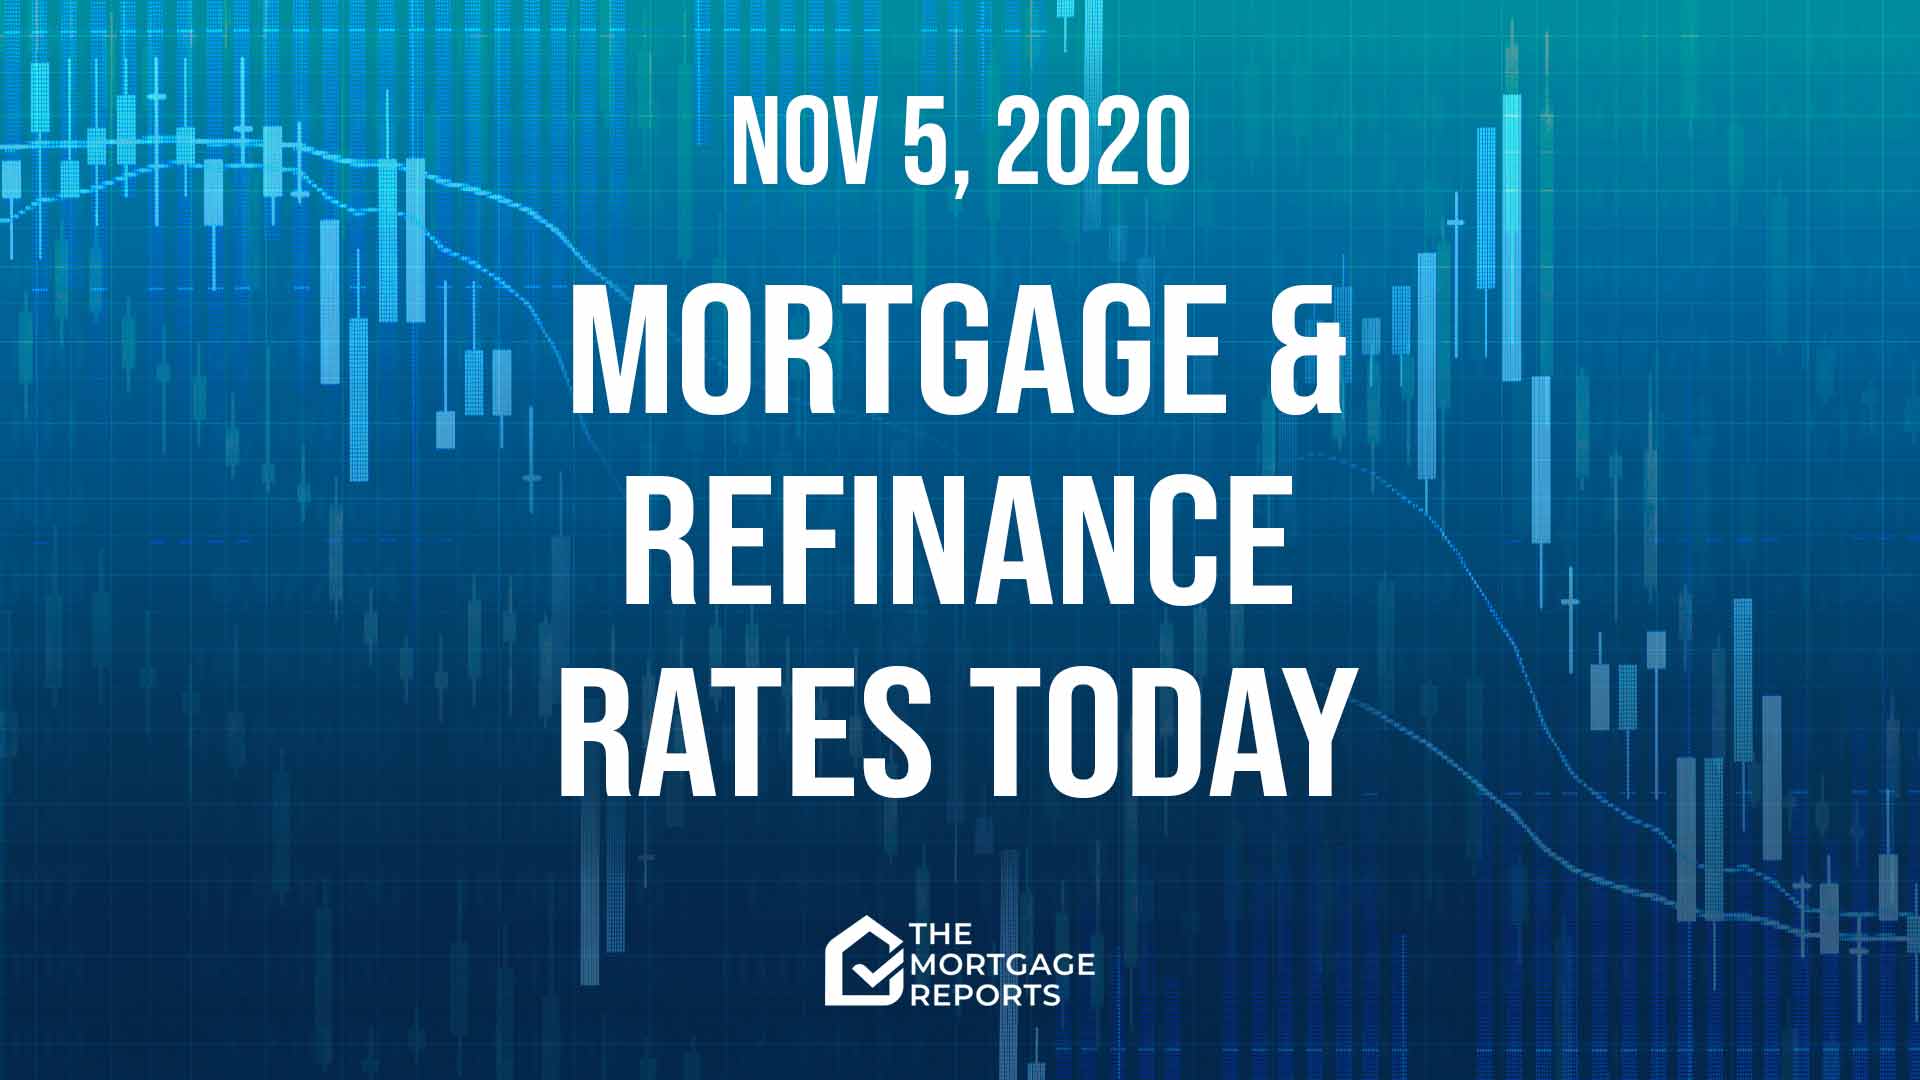 should i refinance or just pay it down to remove pmi